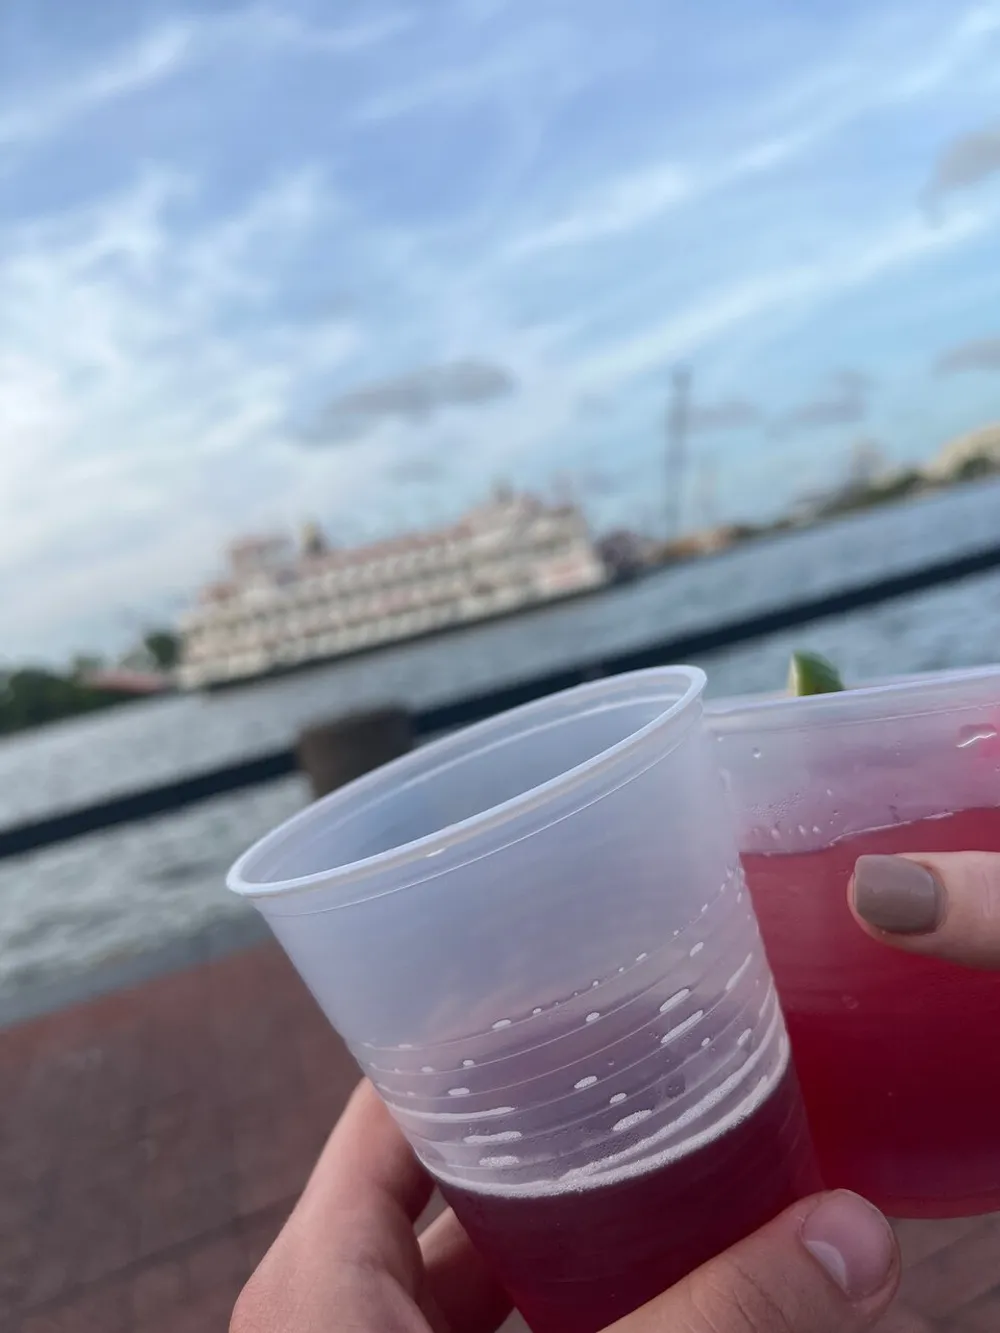 A person is holding two plastic cups of beverages with a blurred view of a waterway and a boat in the background